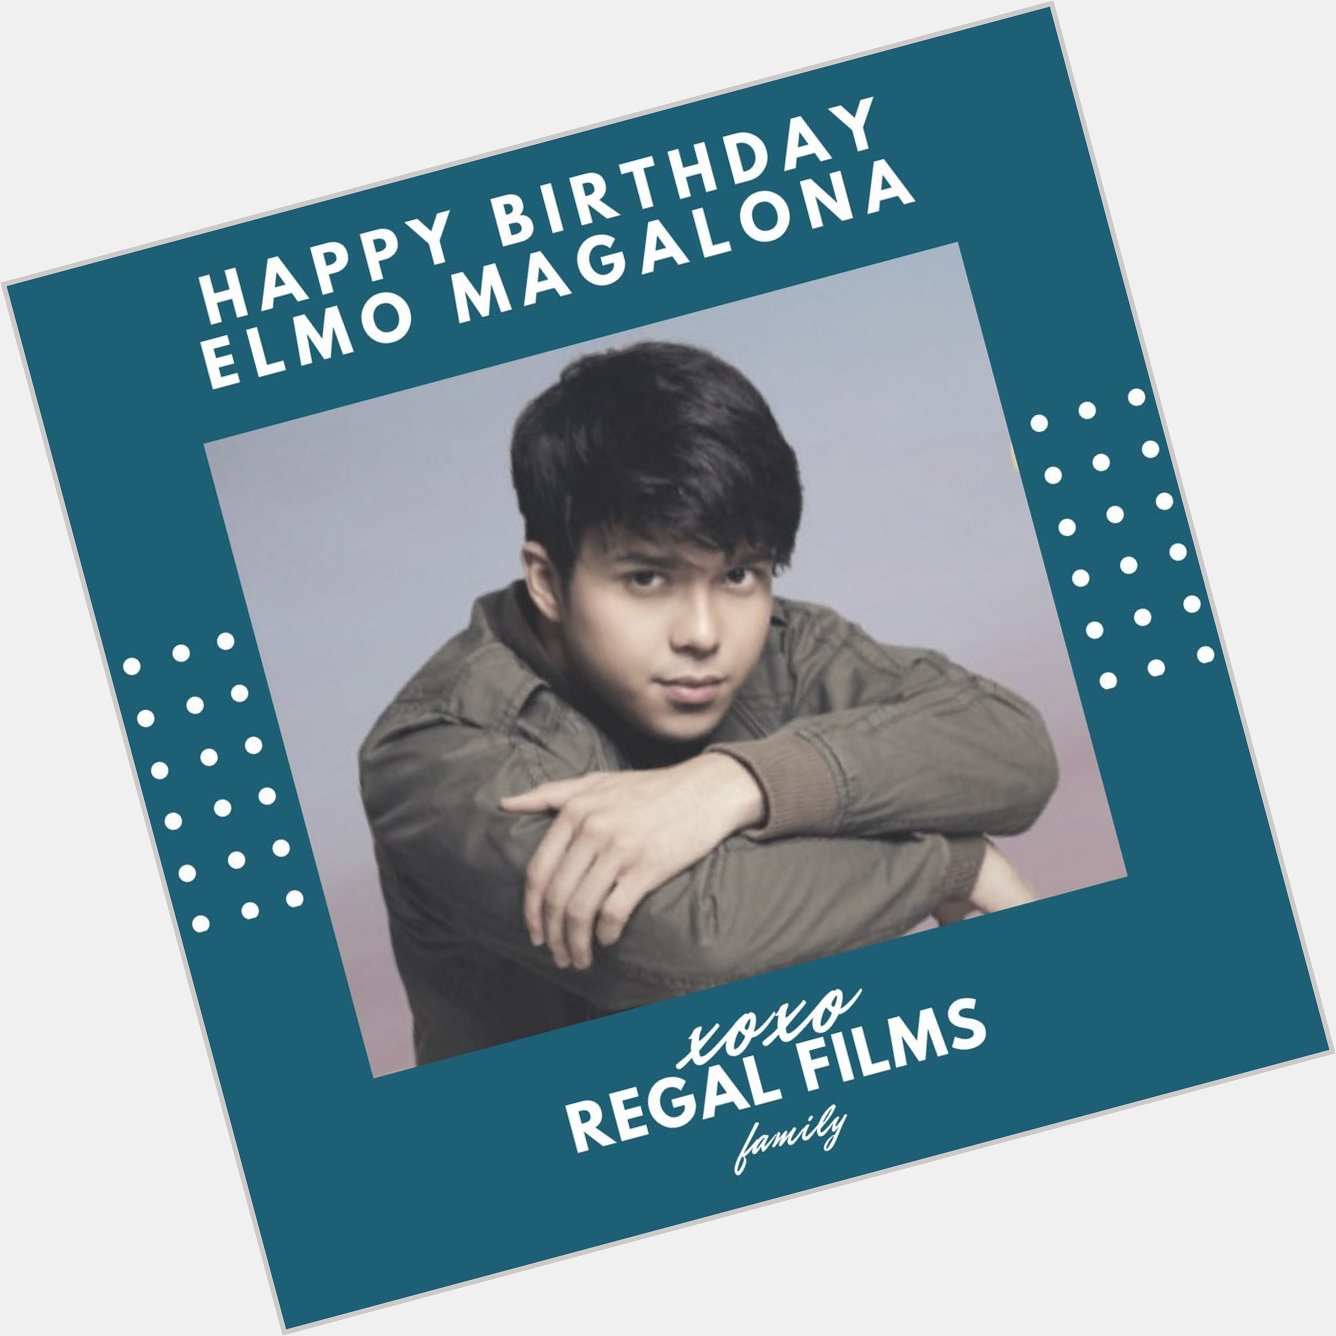 Happy birthday Elmo Magalona!! 
See you in theaters this June!   